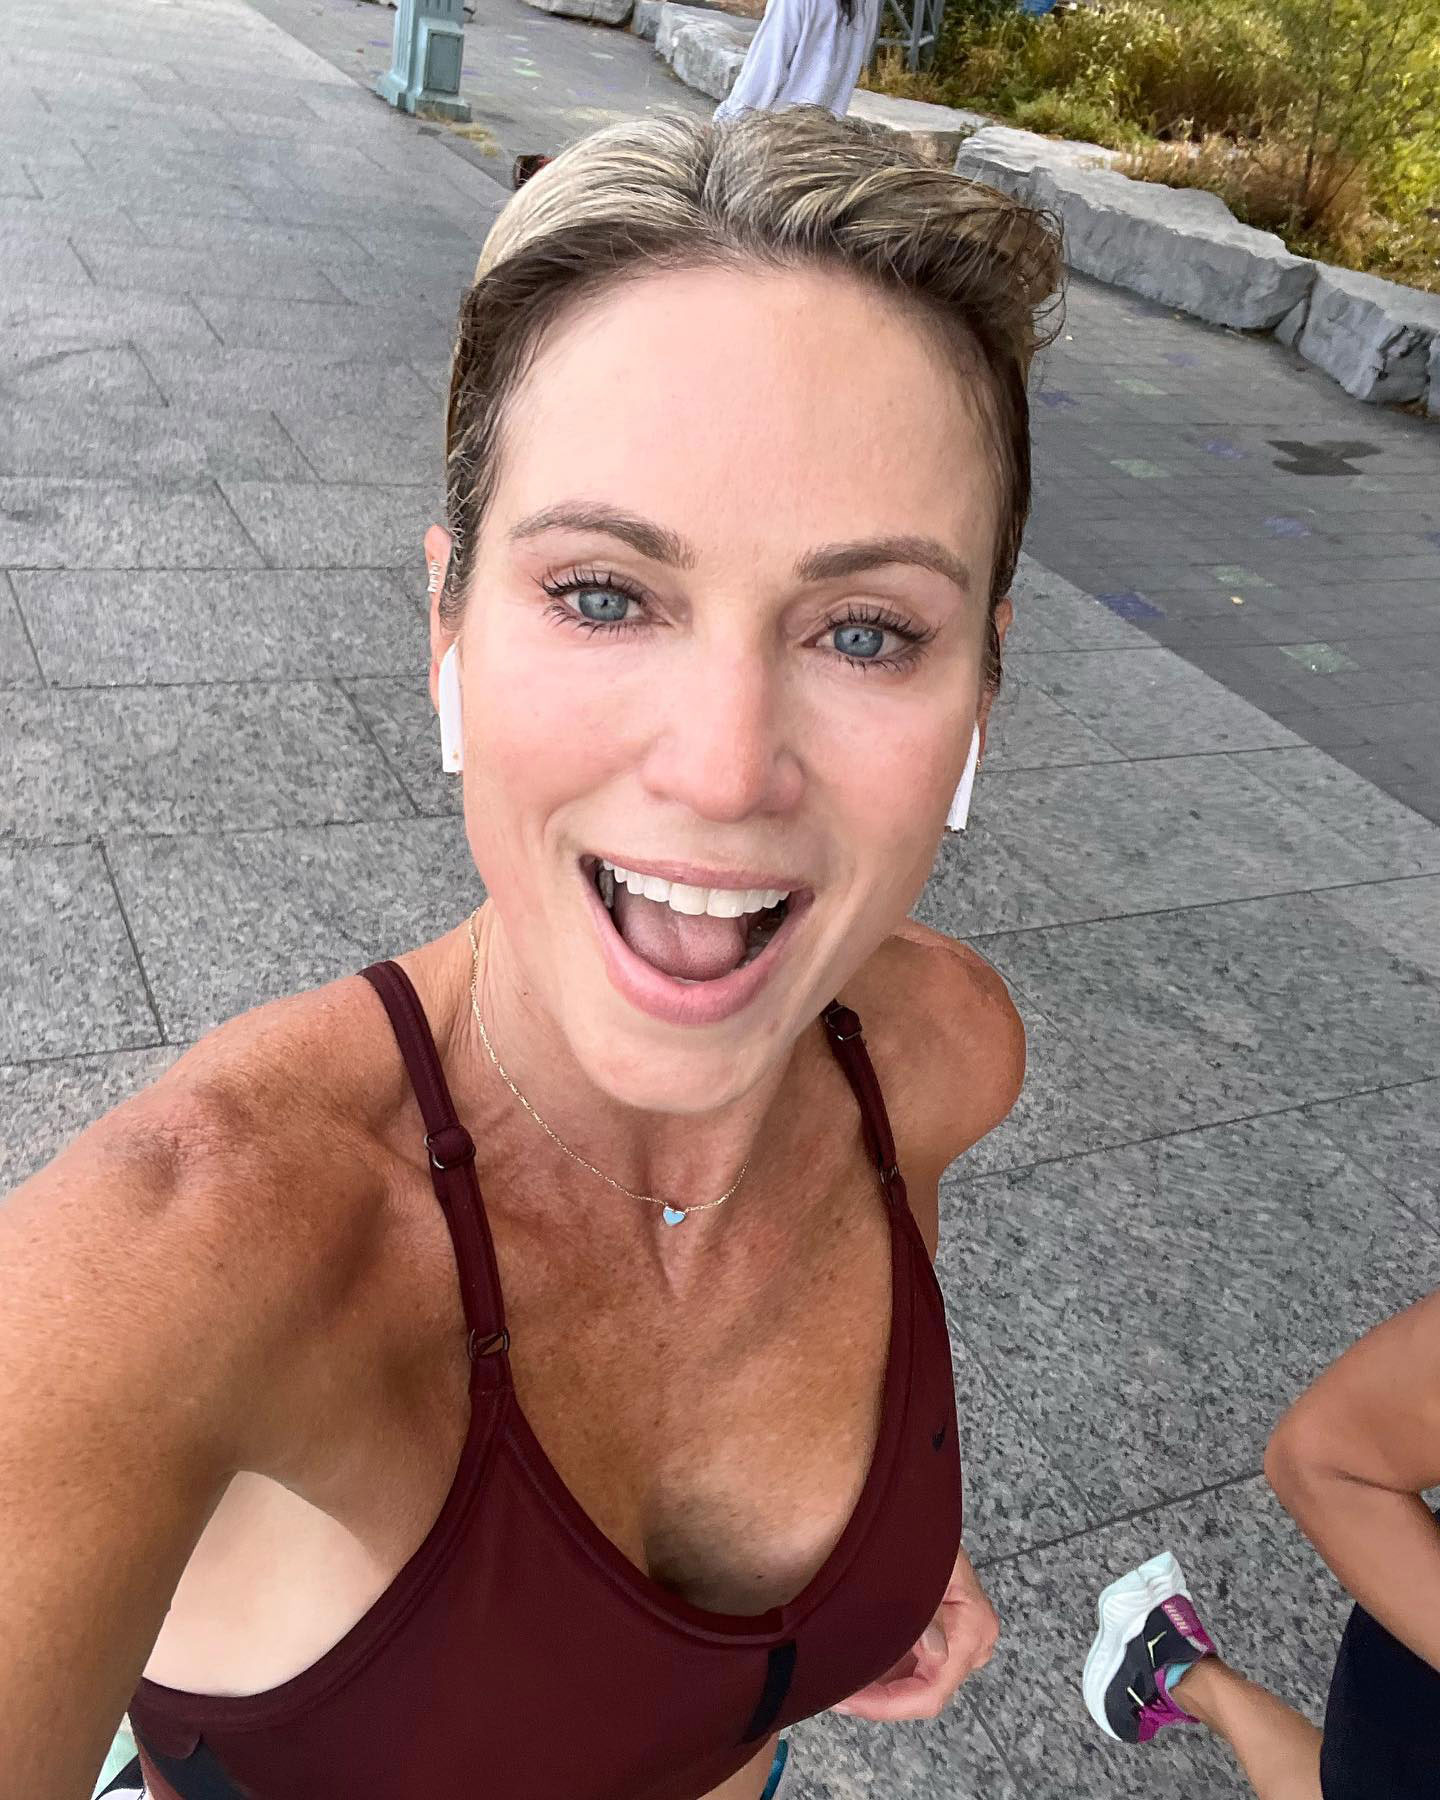 TJ is dating is former GMA3 co-host, Amy Robach